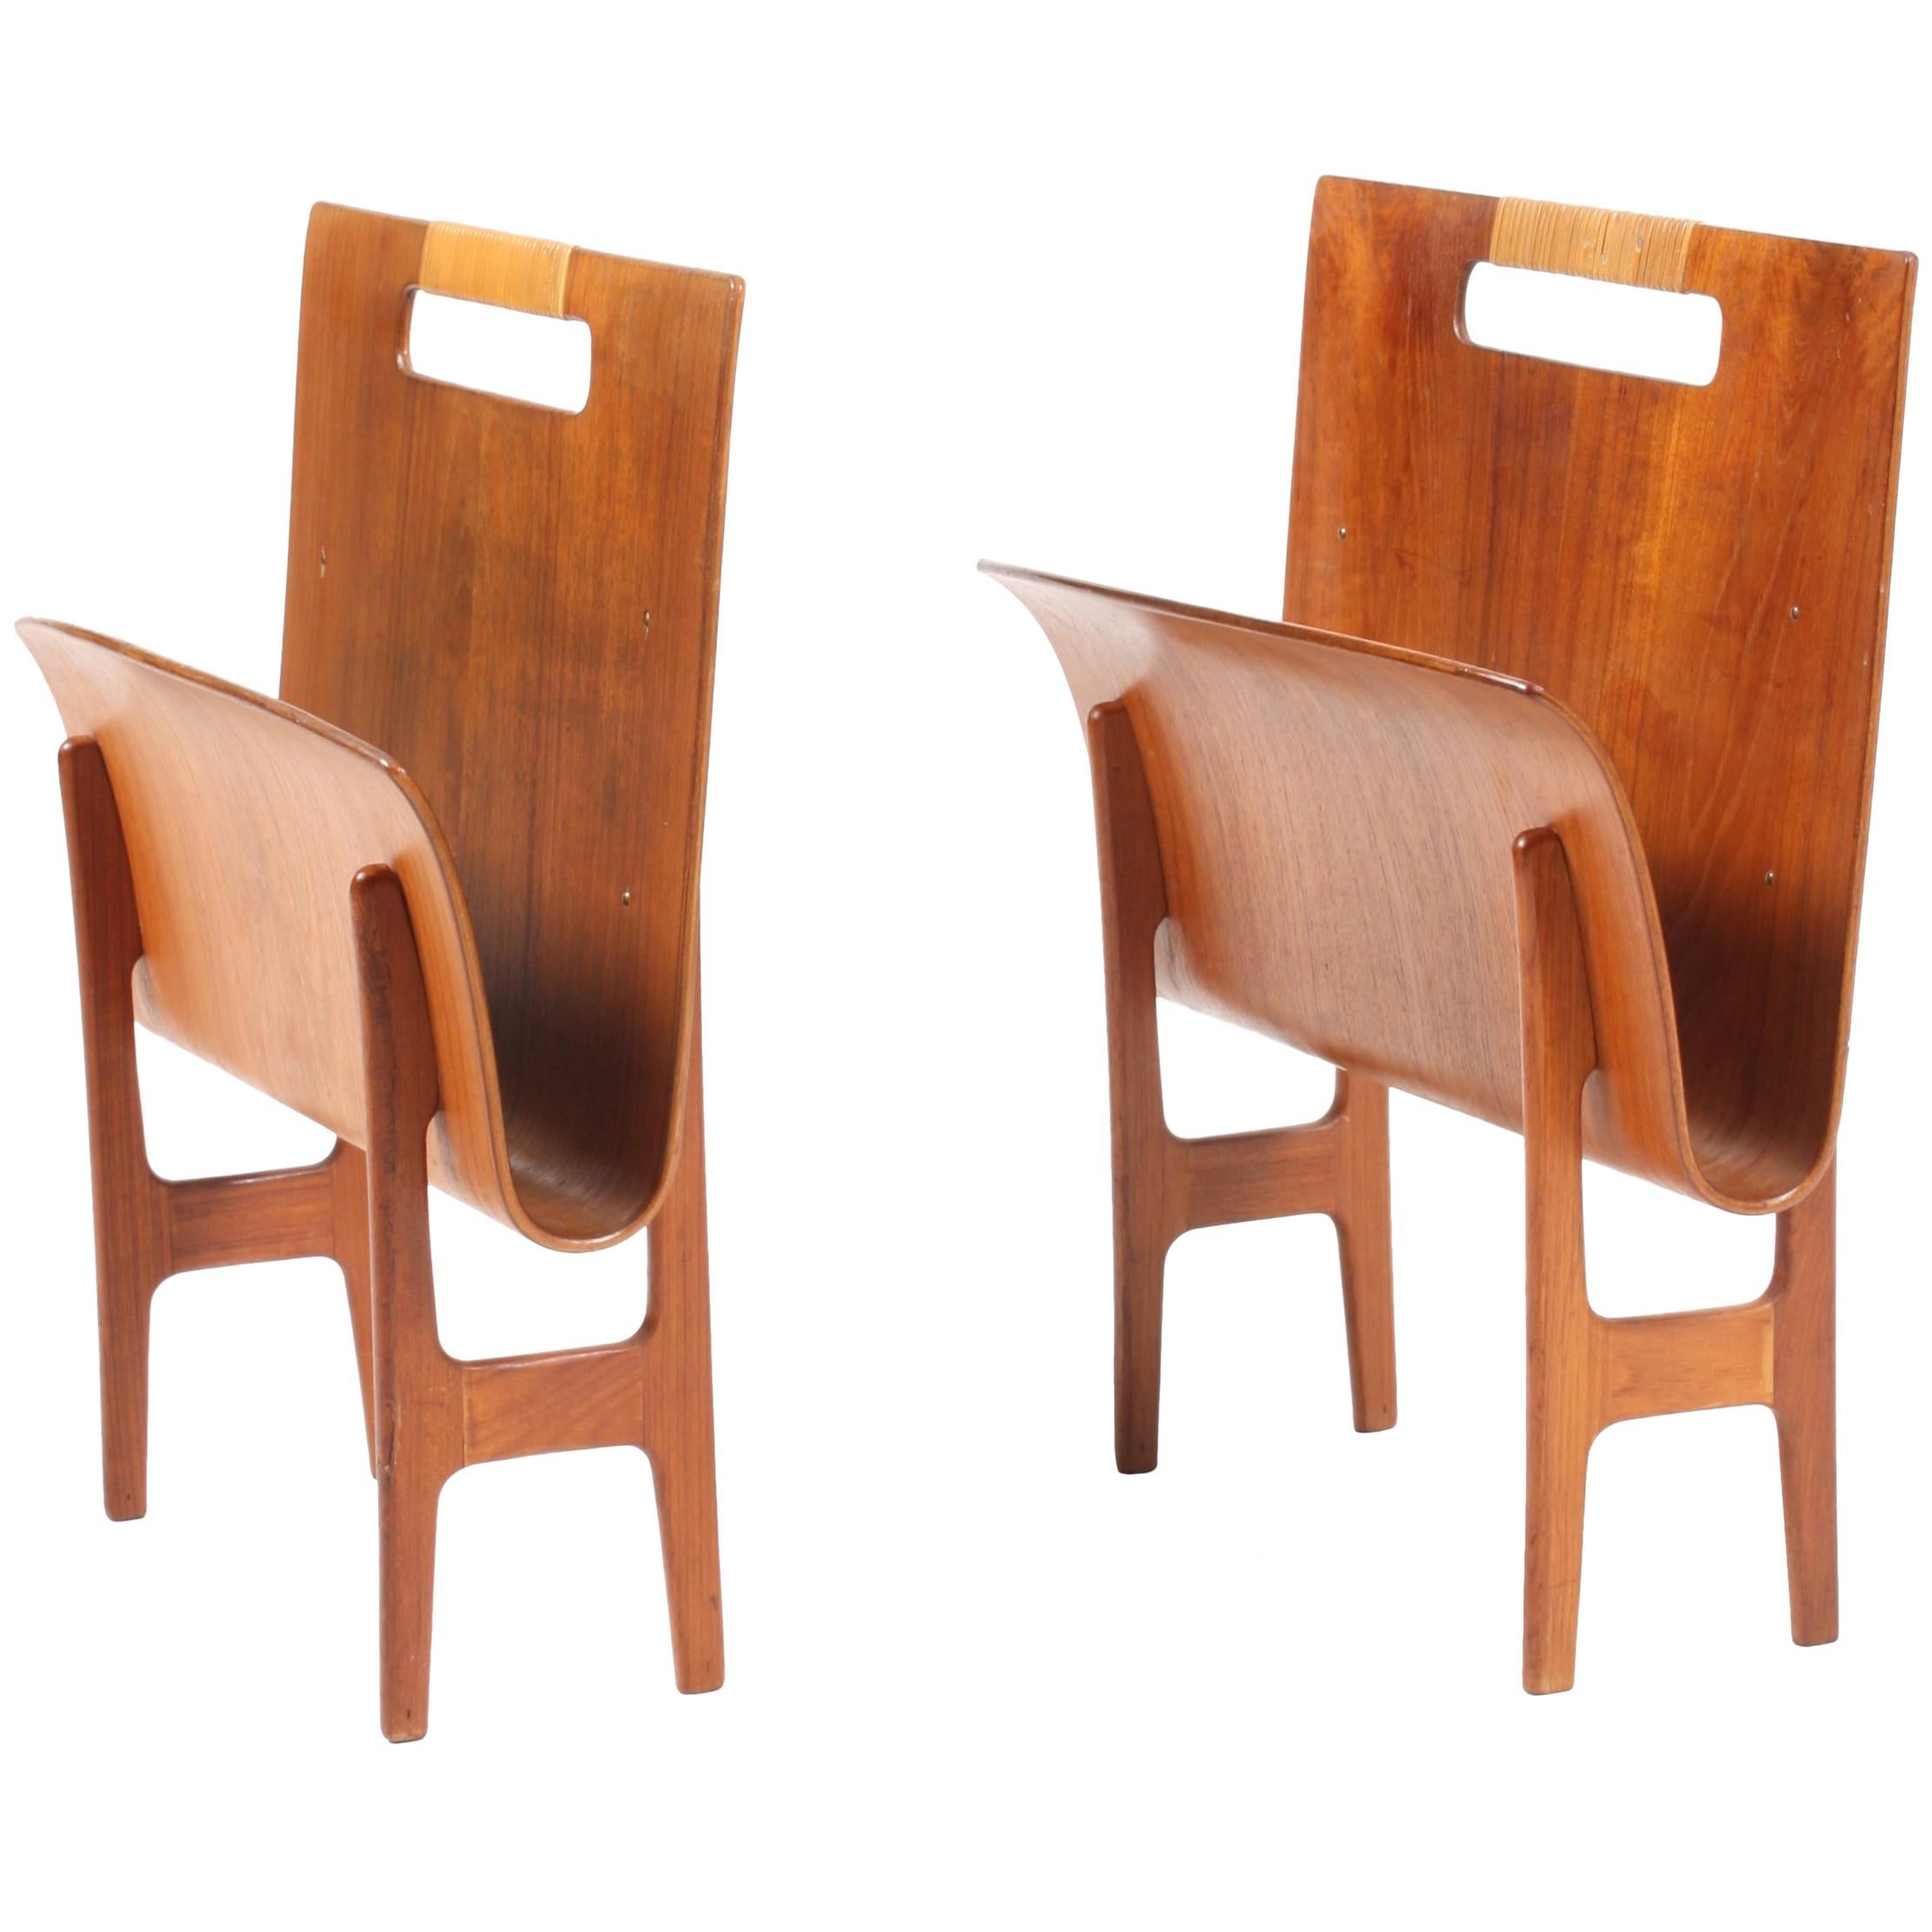 Pair of Magazine Stands by Bender Madsen